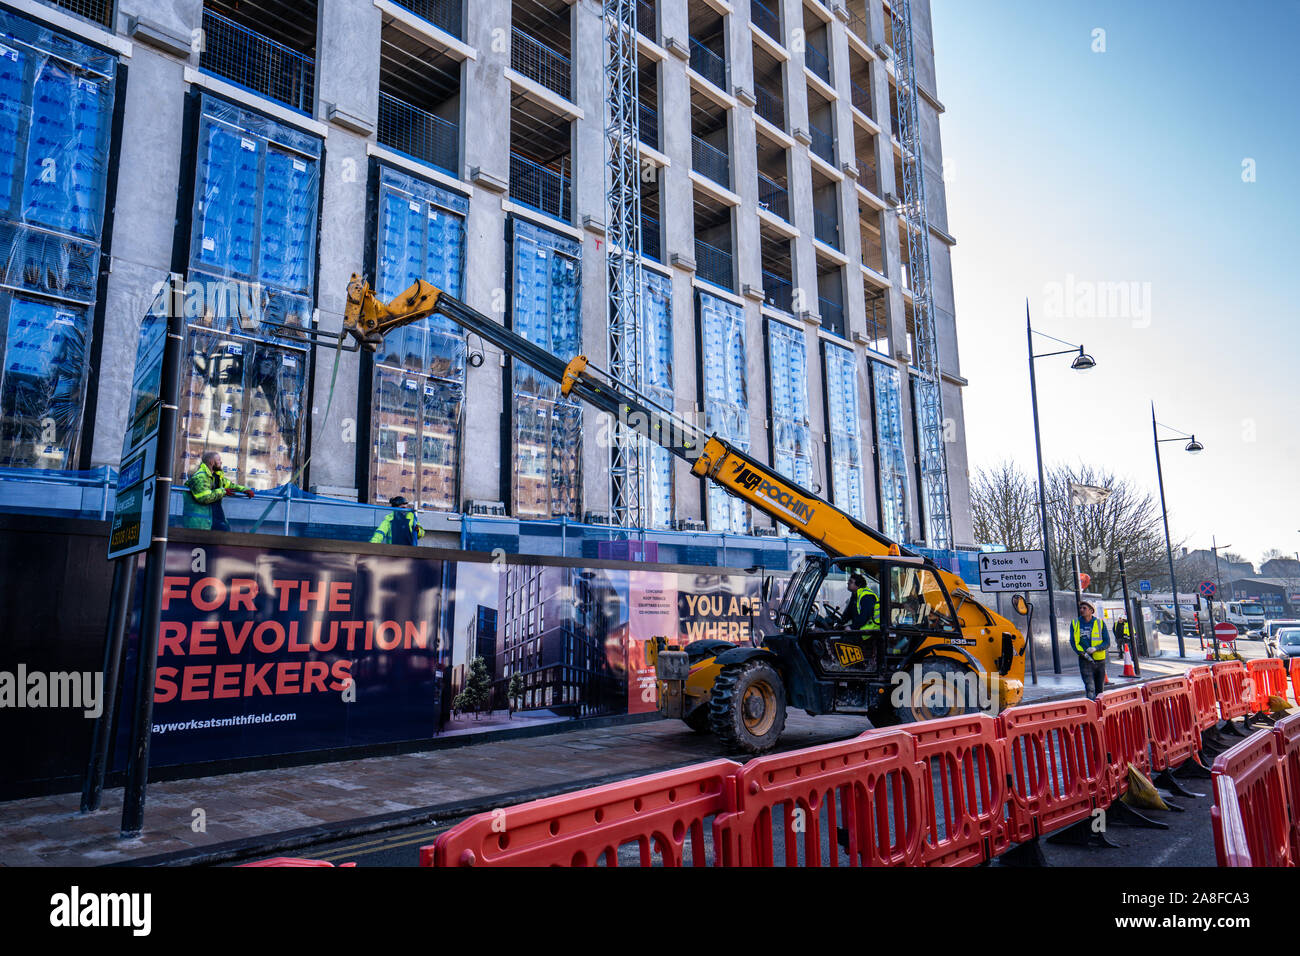 A JCB driver works on the new Hilton Hotel building, structure in Stoke on Trent, Hanley, loading and unloading materials for his work colleagues Stock Photo